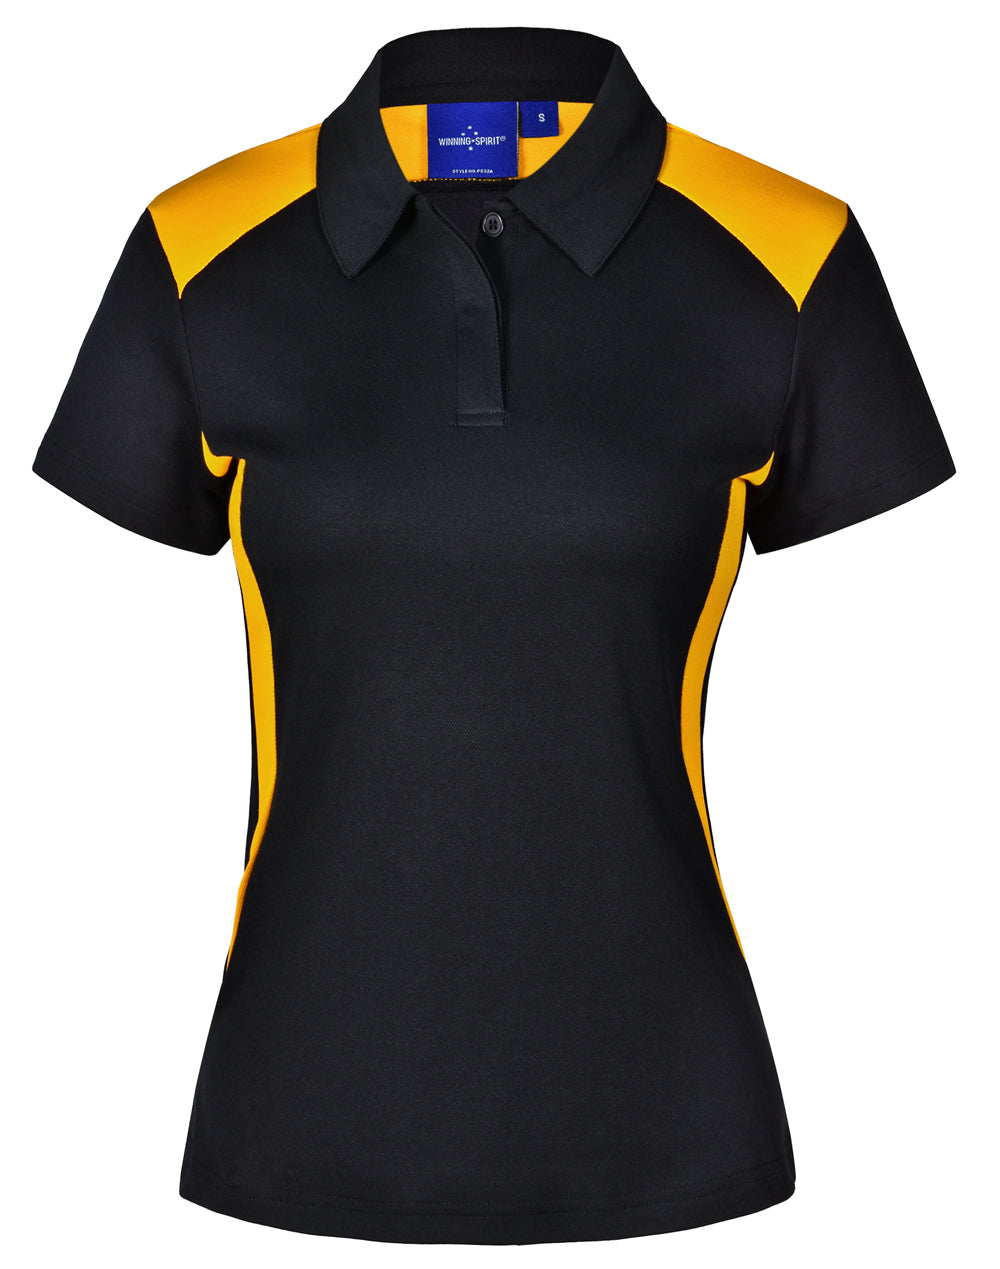 [PS32A] Ladies' Truedry S/S Contrast Polo